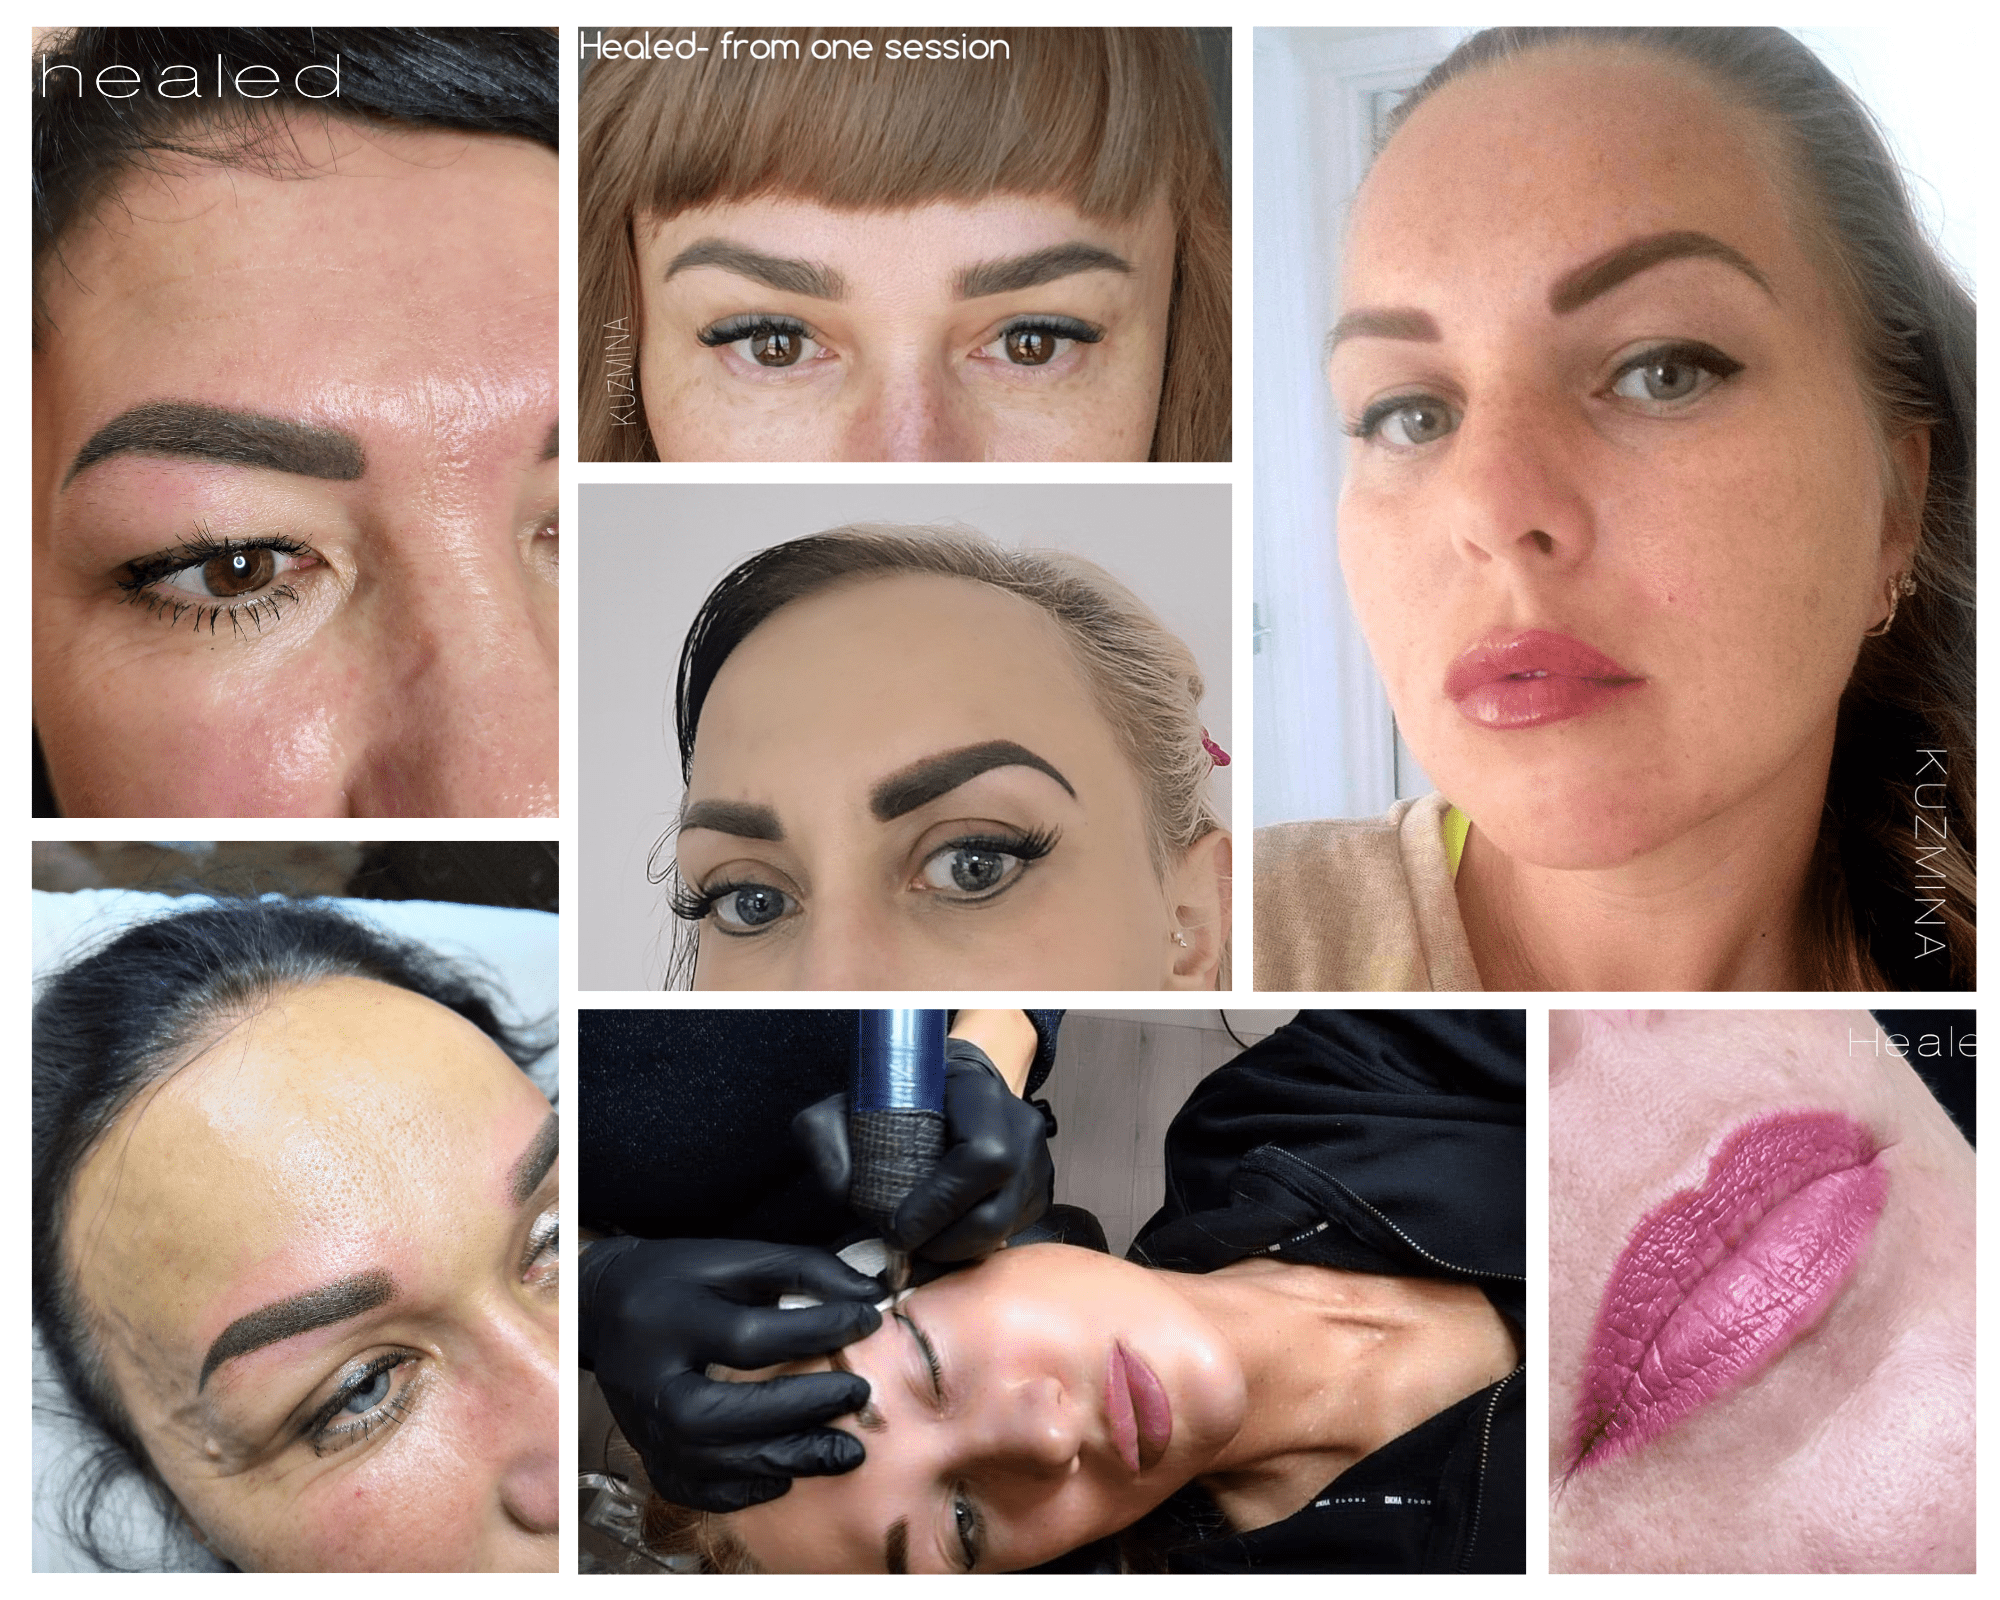 A series of after photos showing the healed results of clients' eyebrows and lips post medical tattooing by Helen Kuzmina.